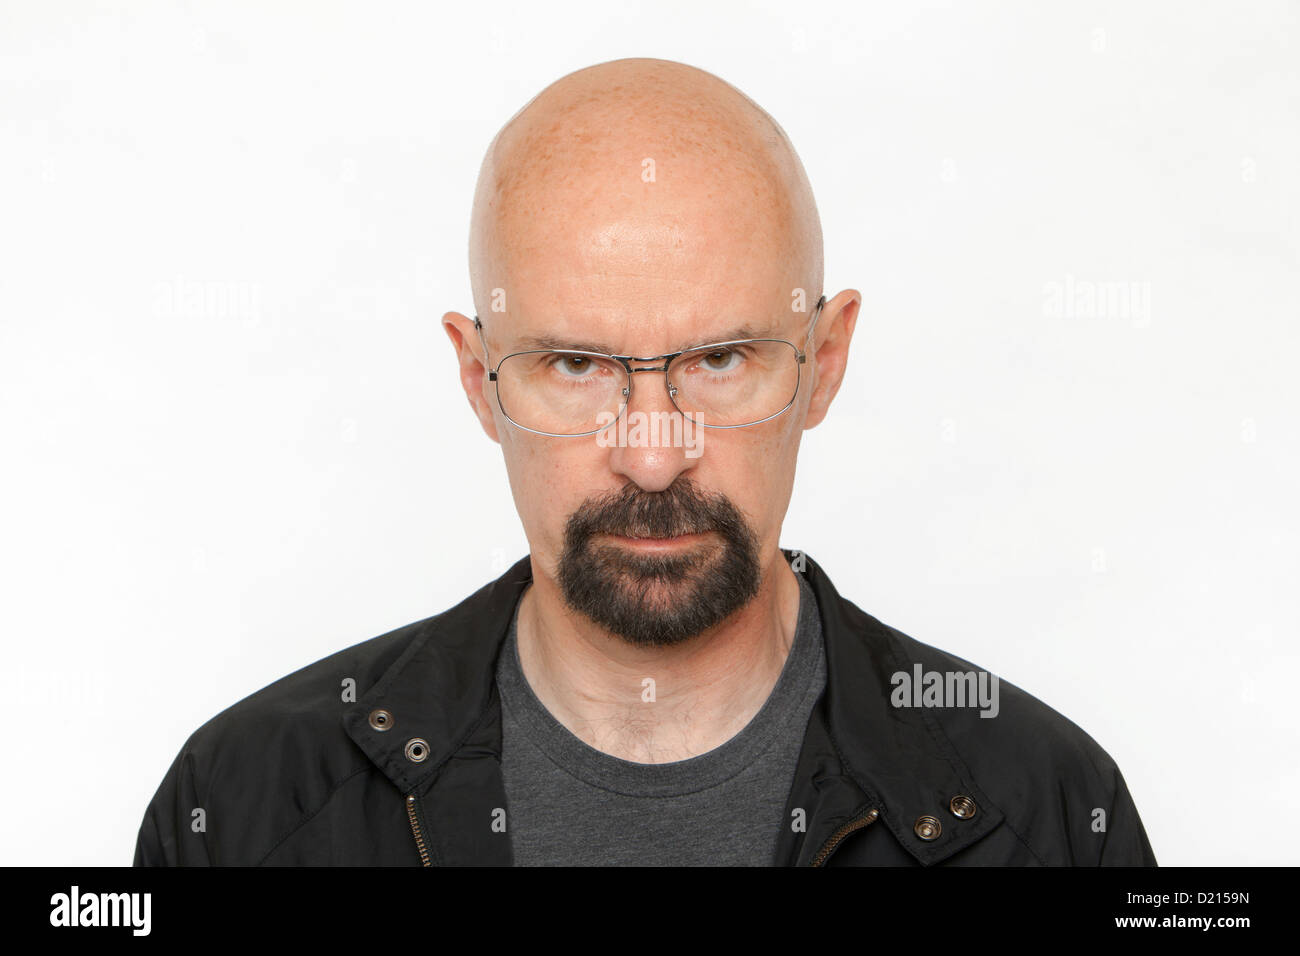 Portrait of a serious and unsmiling bald man against a white background. Stock Photo